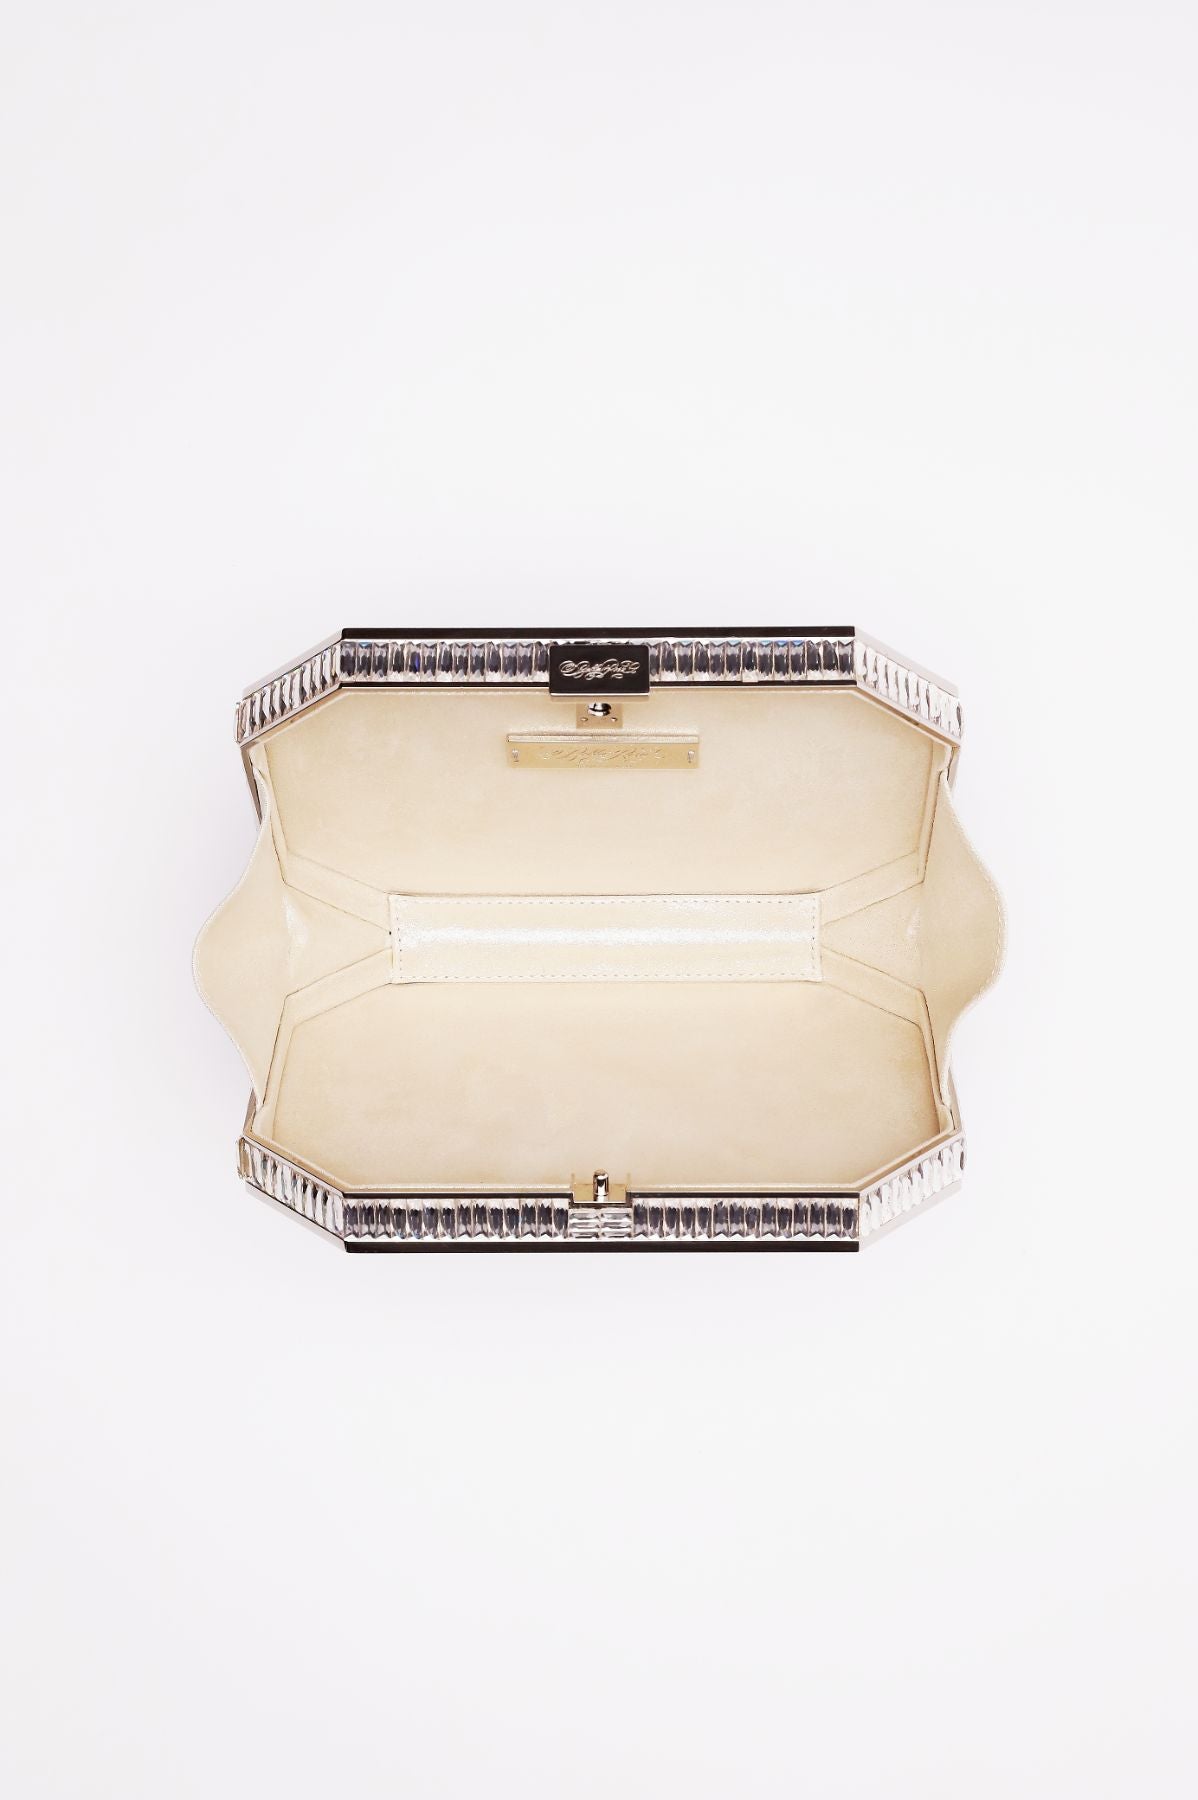 Top open view of Como clutch in white satin with silver gemmed frame.